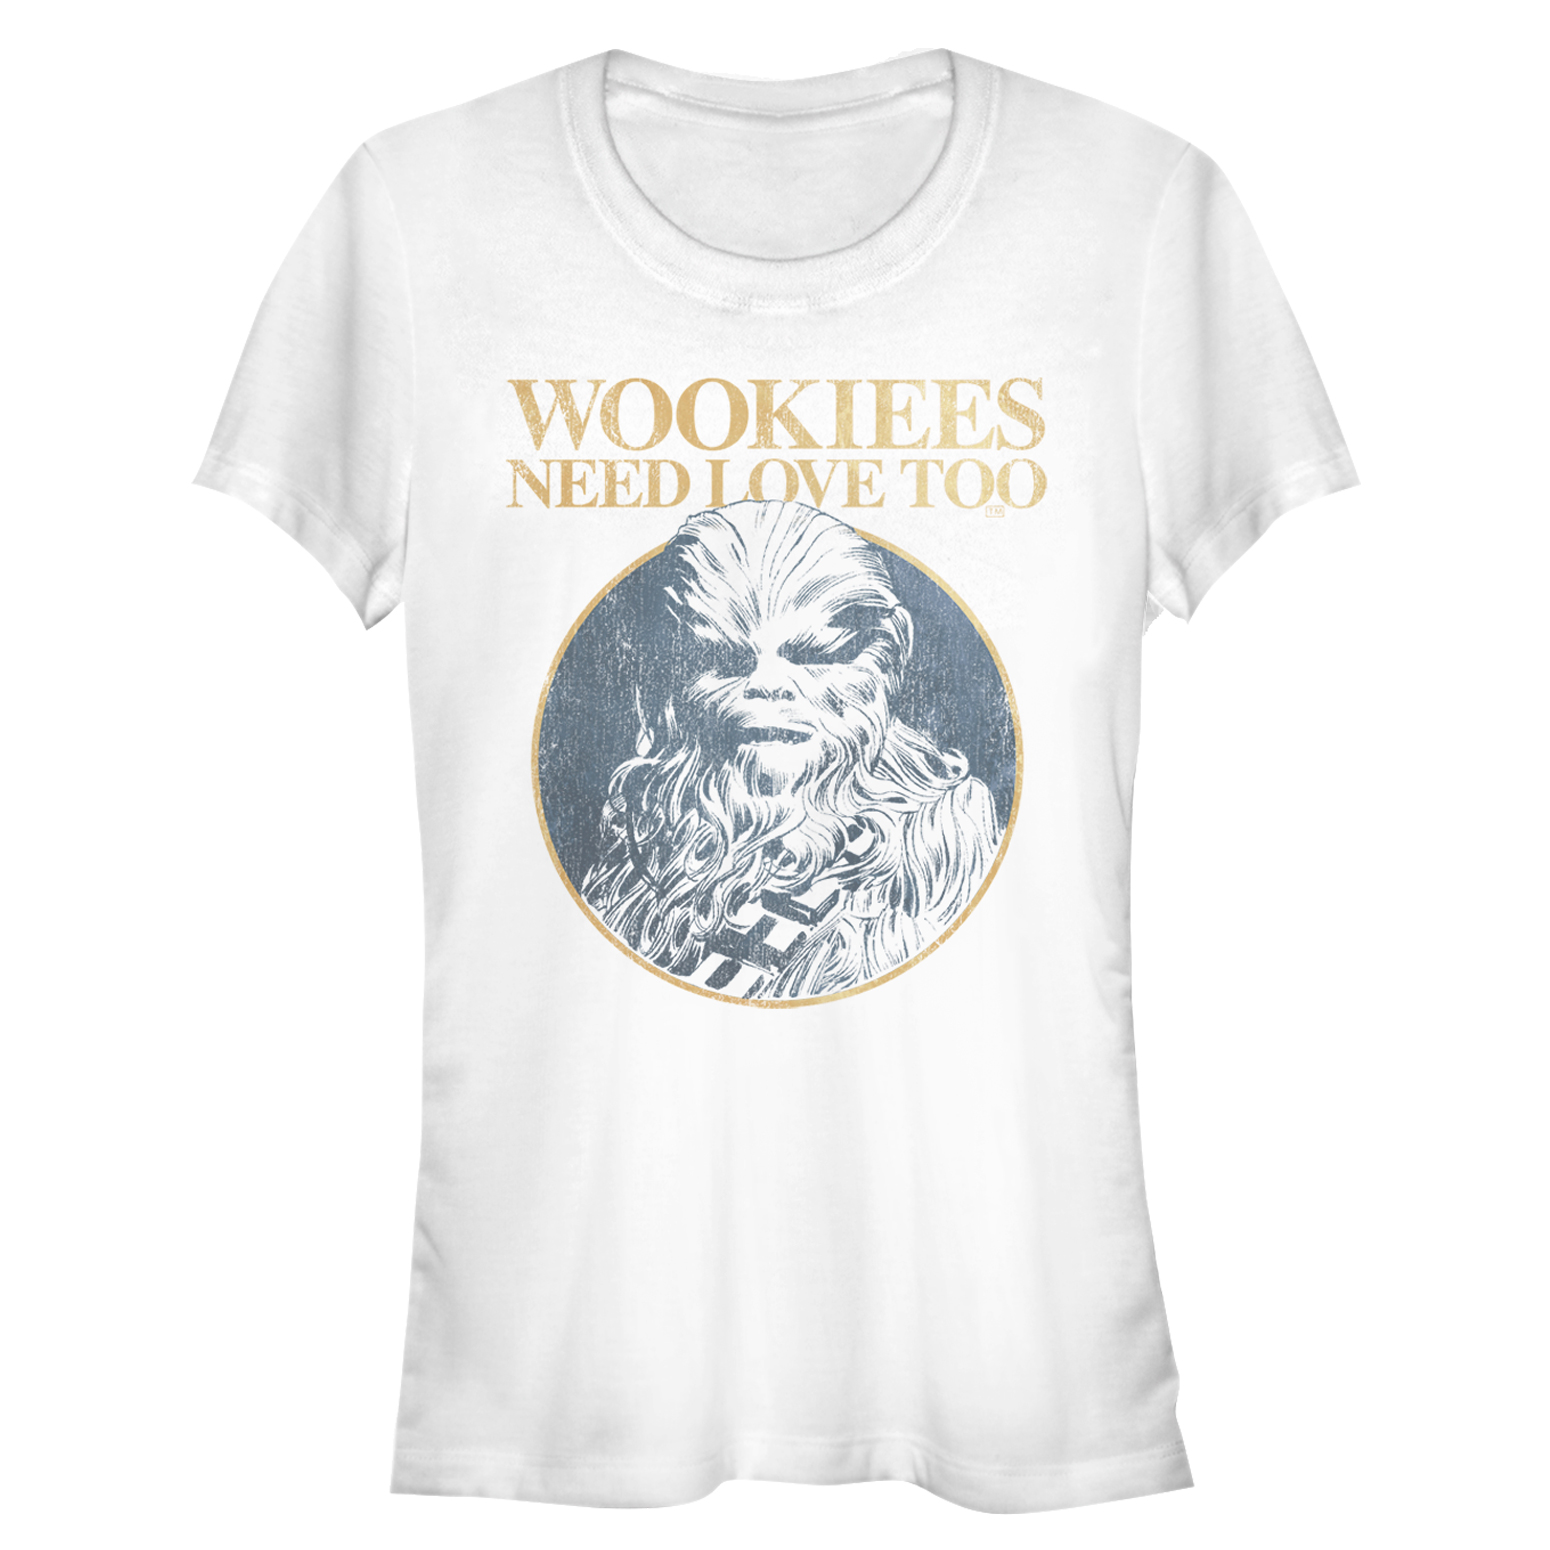 SW "Wookiees Need Love Too" Valentine's Day T-Shirt